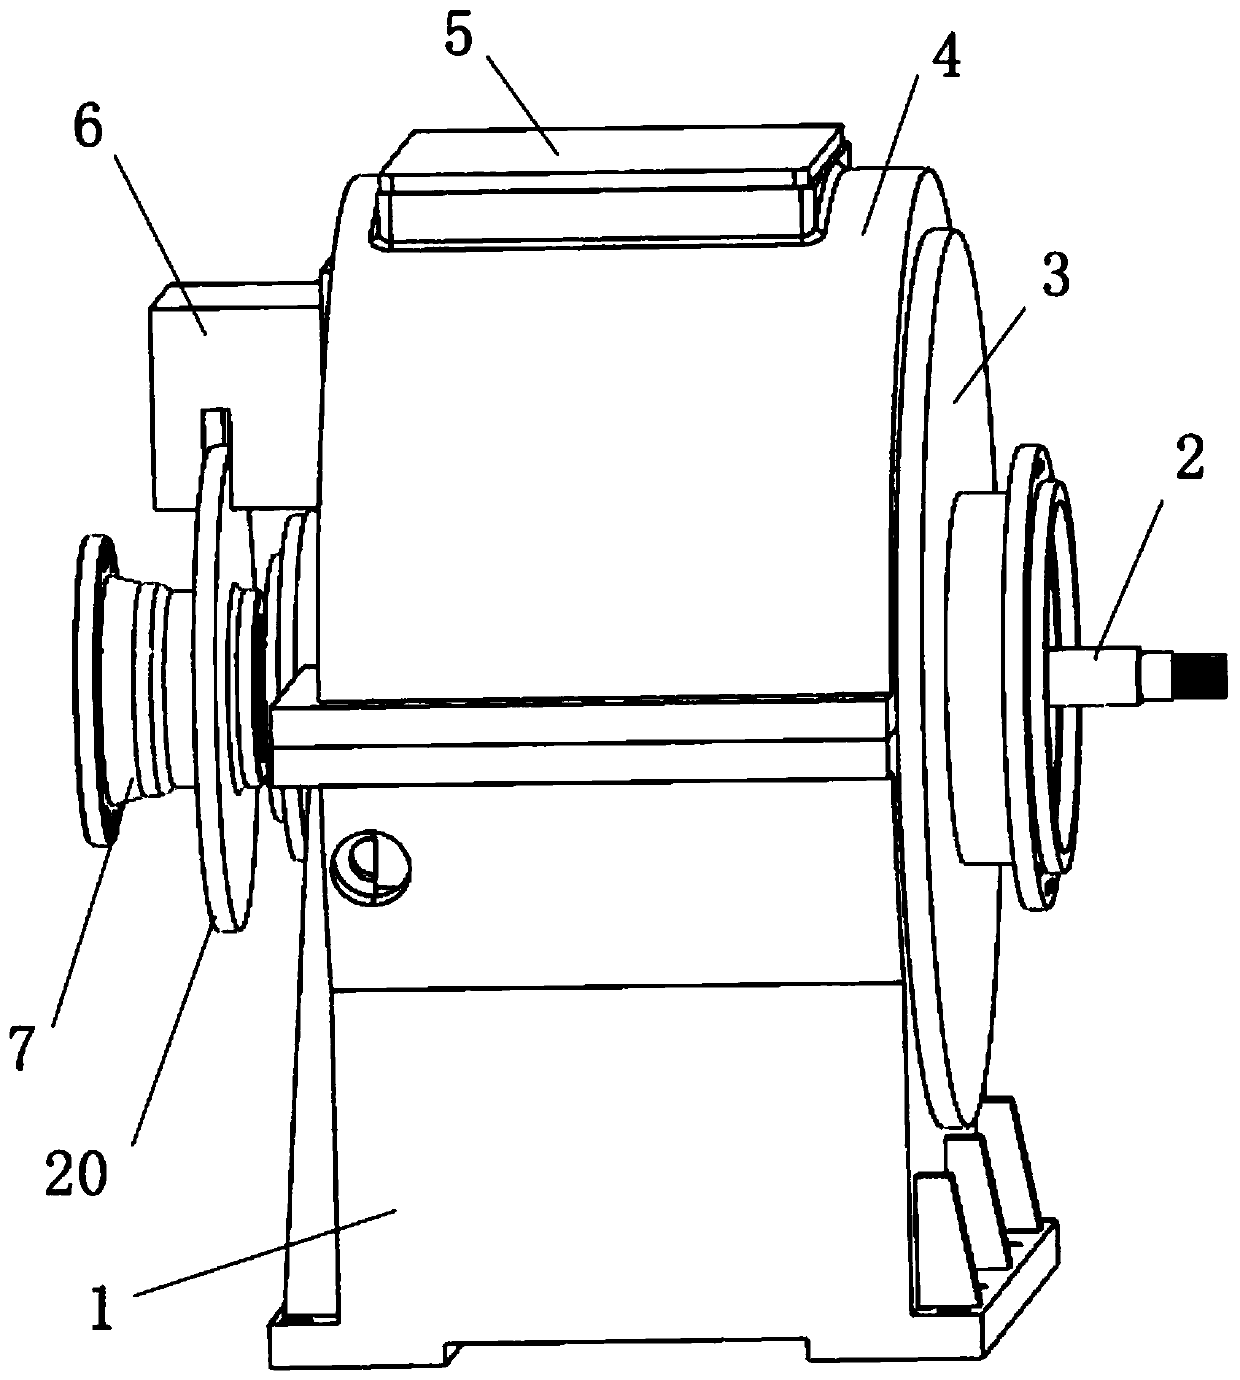 Speed reduction box for turbine fracturing